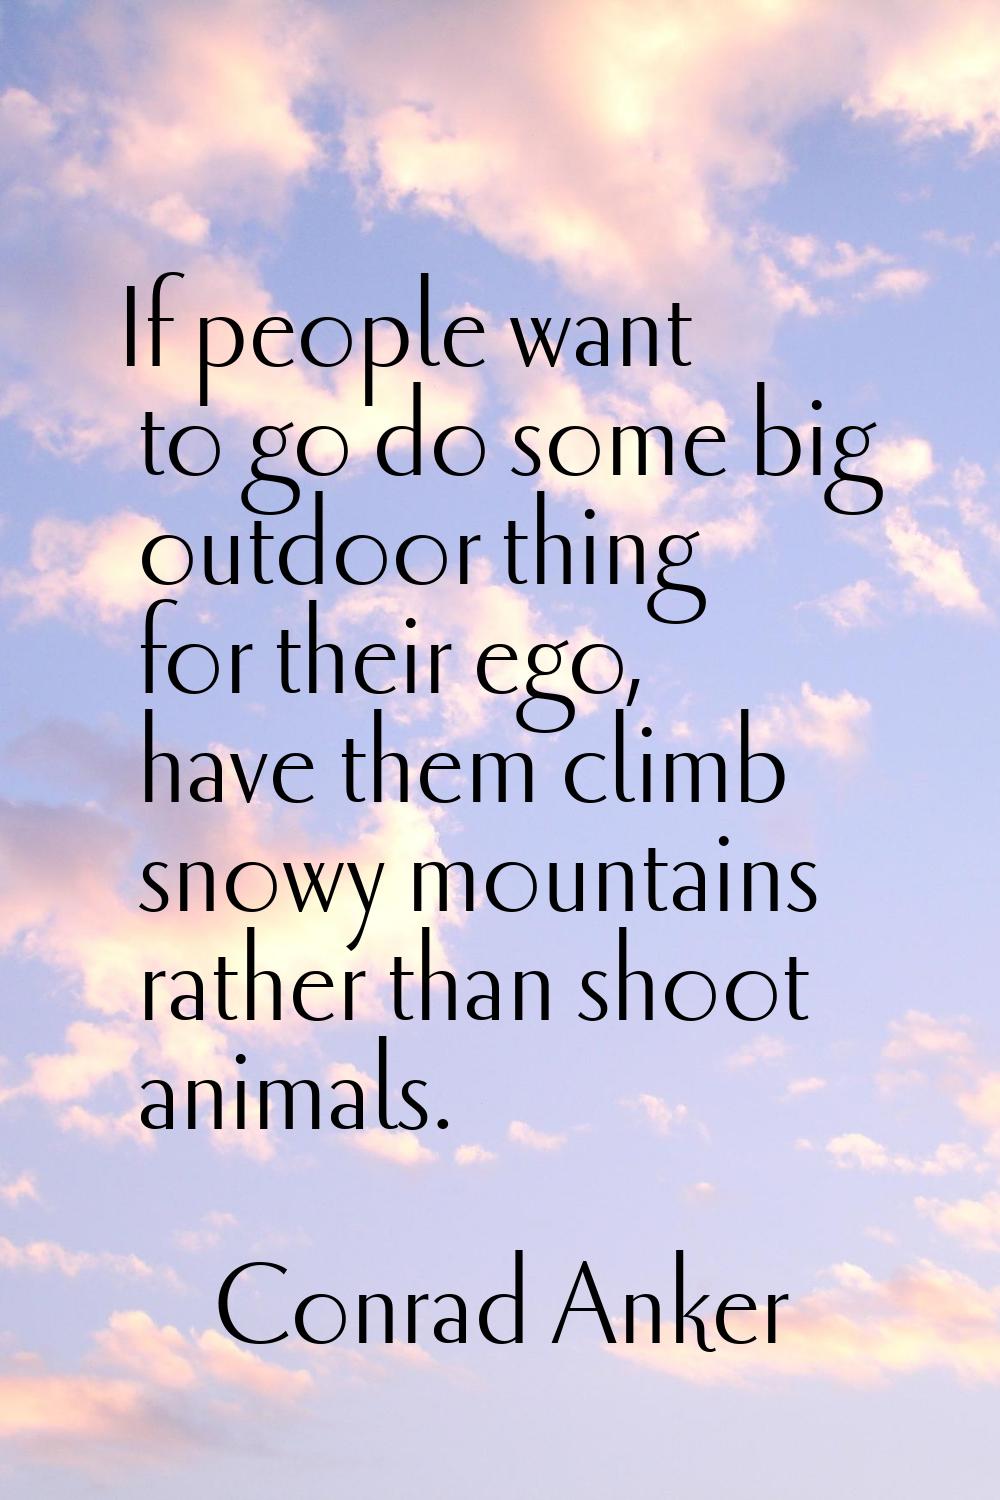 If people want to go do some big outdoor thing for their ego, have them climb snowy mountains rathe